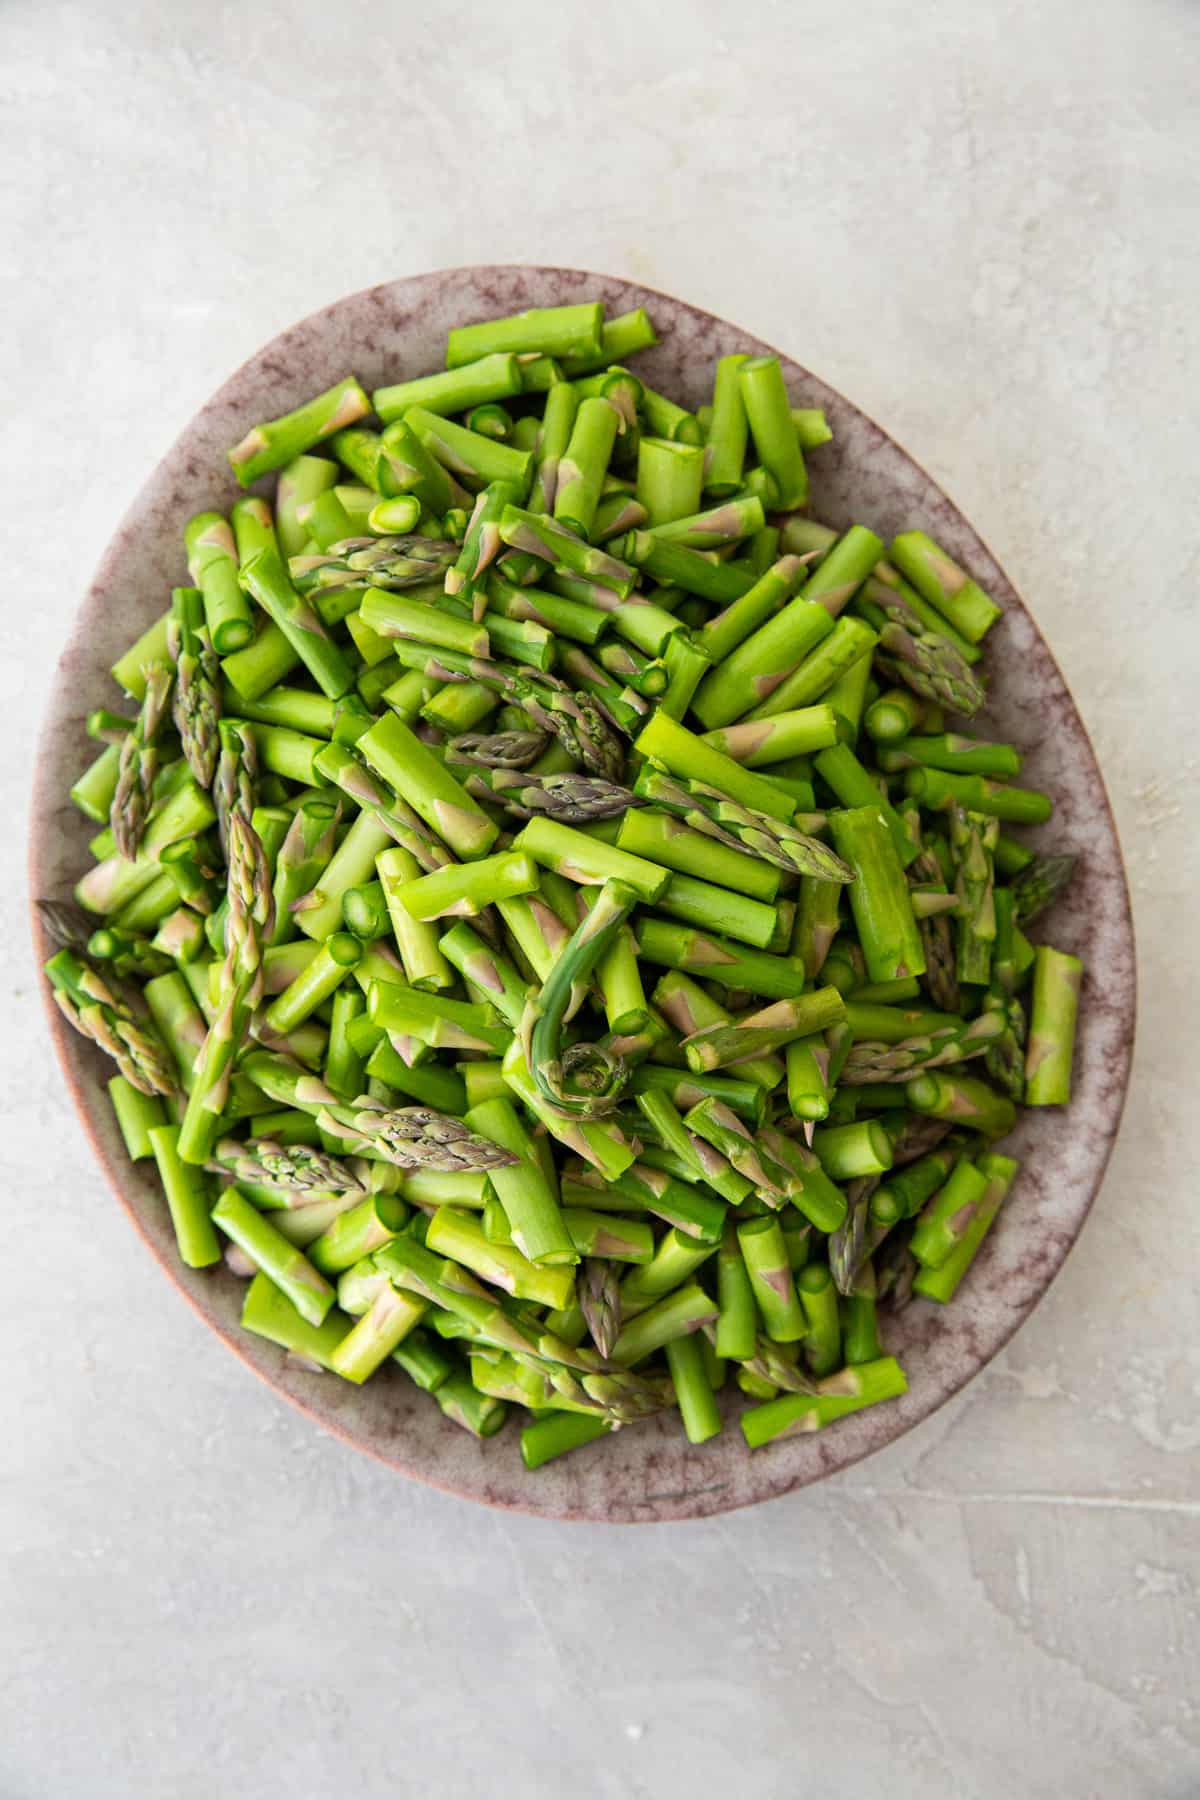 A plate filled with chopped asparagus.